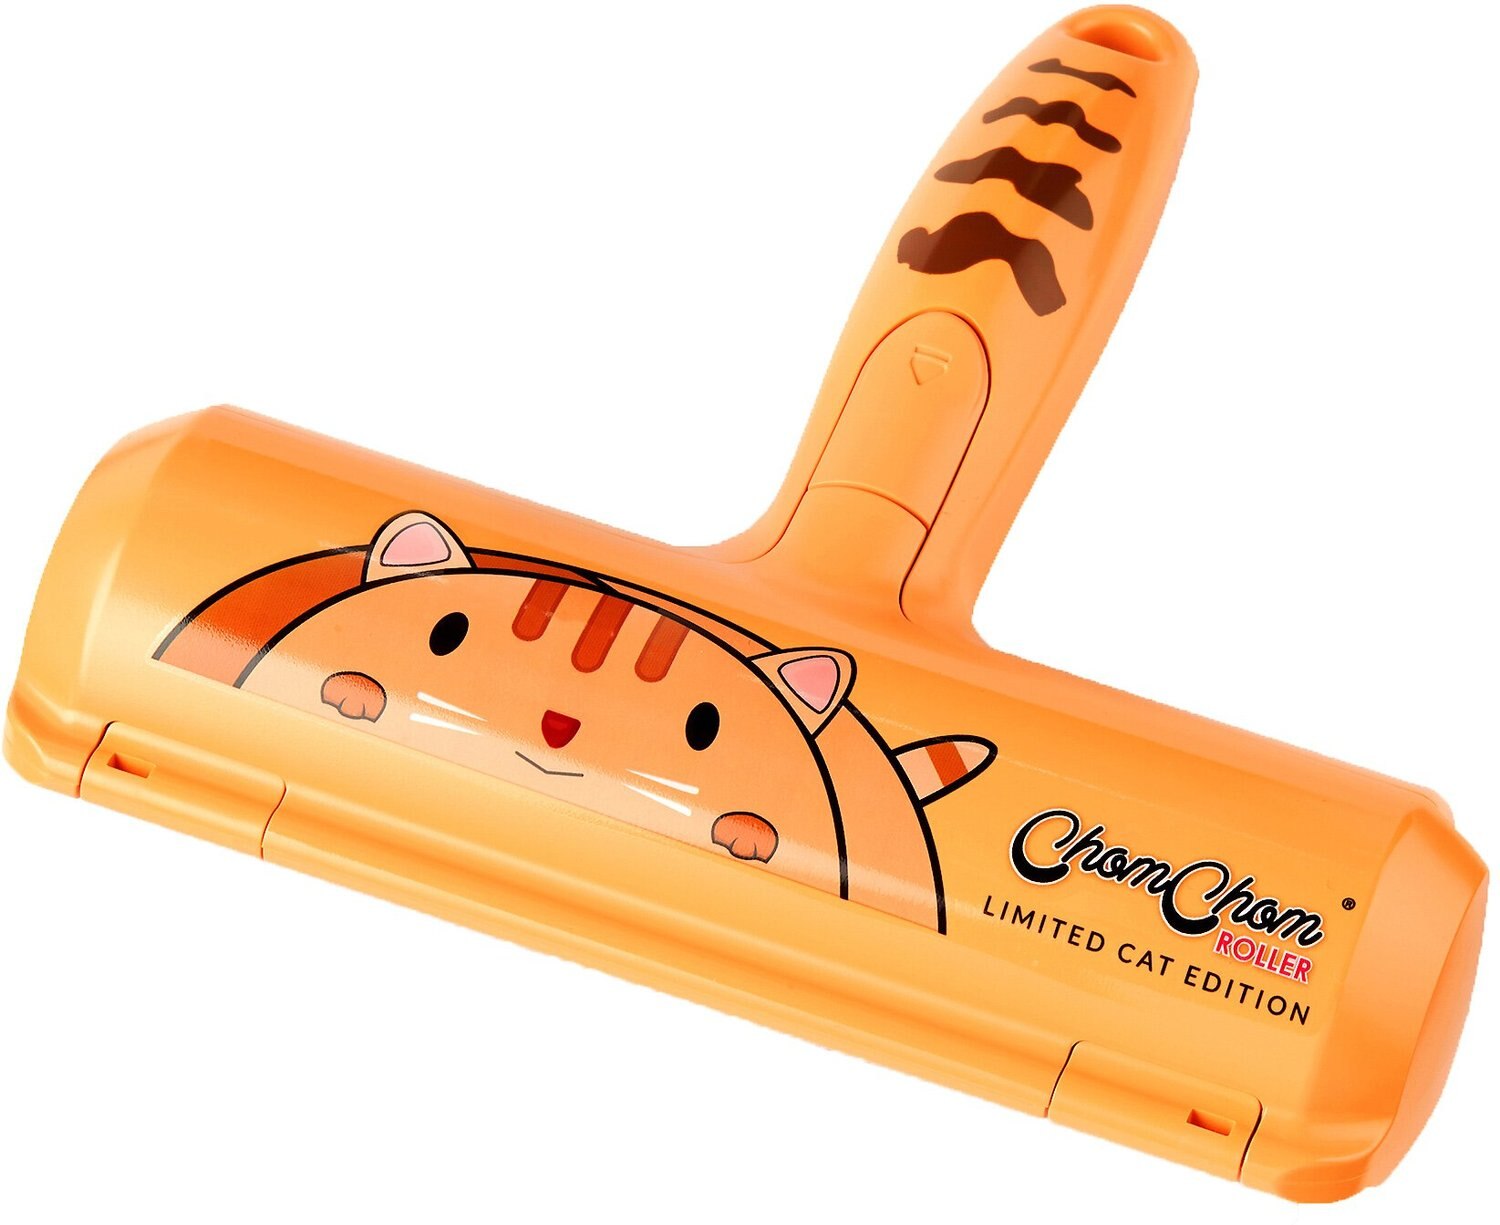 Chom Chom Roller Dog/Cat Hair Remover NEW Free Ship 